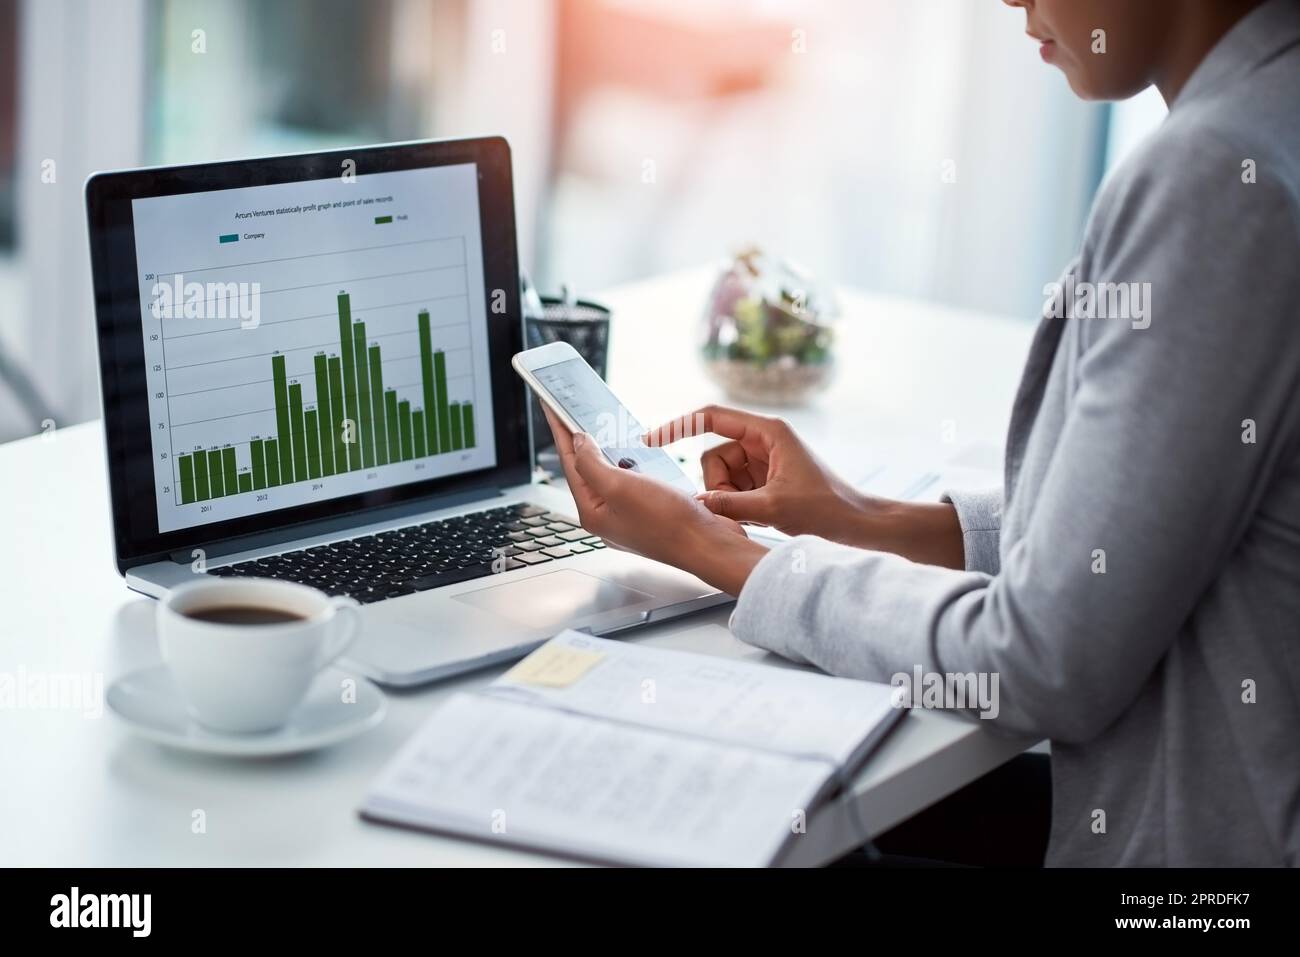 Female data analyst or finance manager working on phone in a modern office. Business professional multitasking with graph and chart data on laptop, planning and analysis at the workplace. Stock Photo